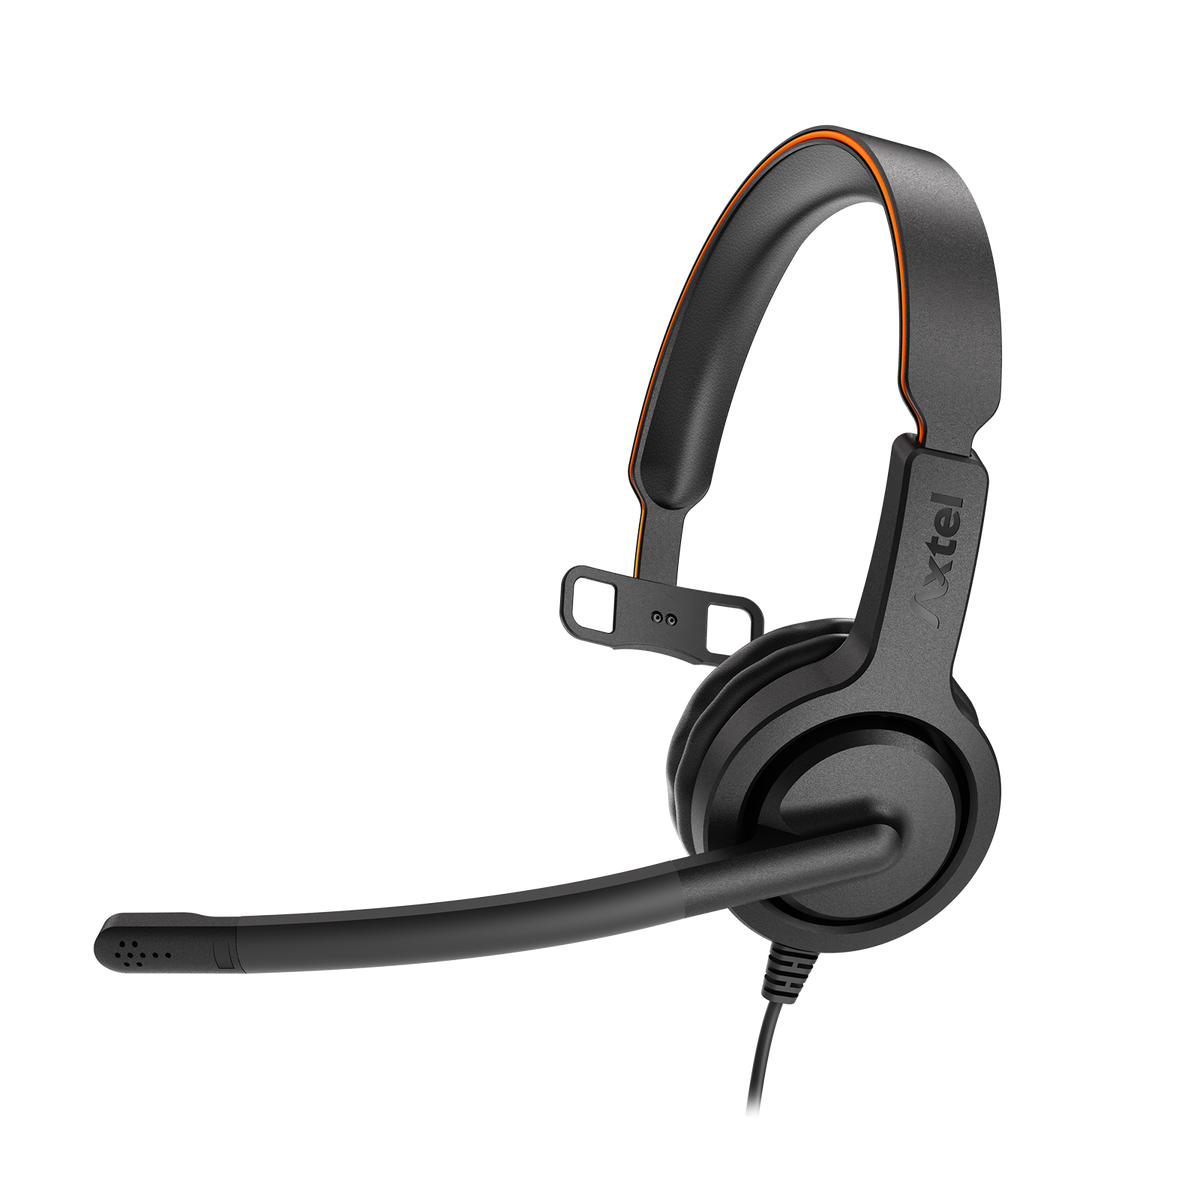 AXTEL-AXH-V40M-HEADSET-SIDE-VIEW